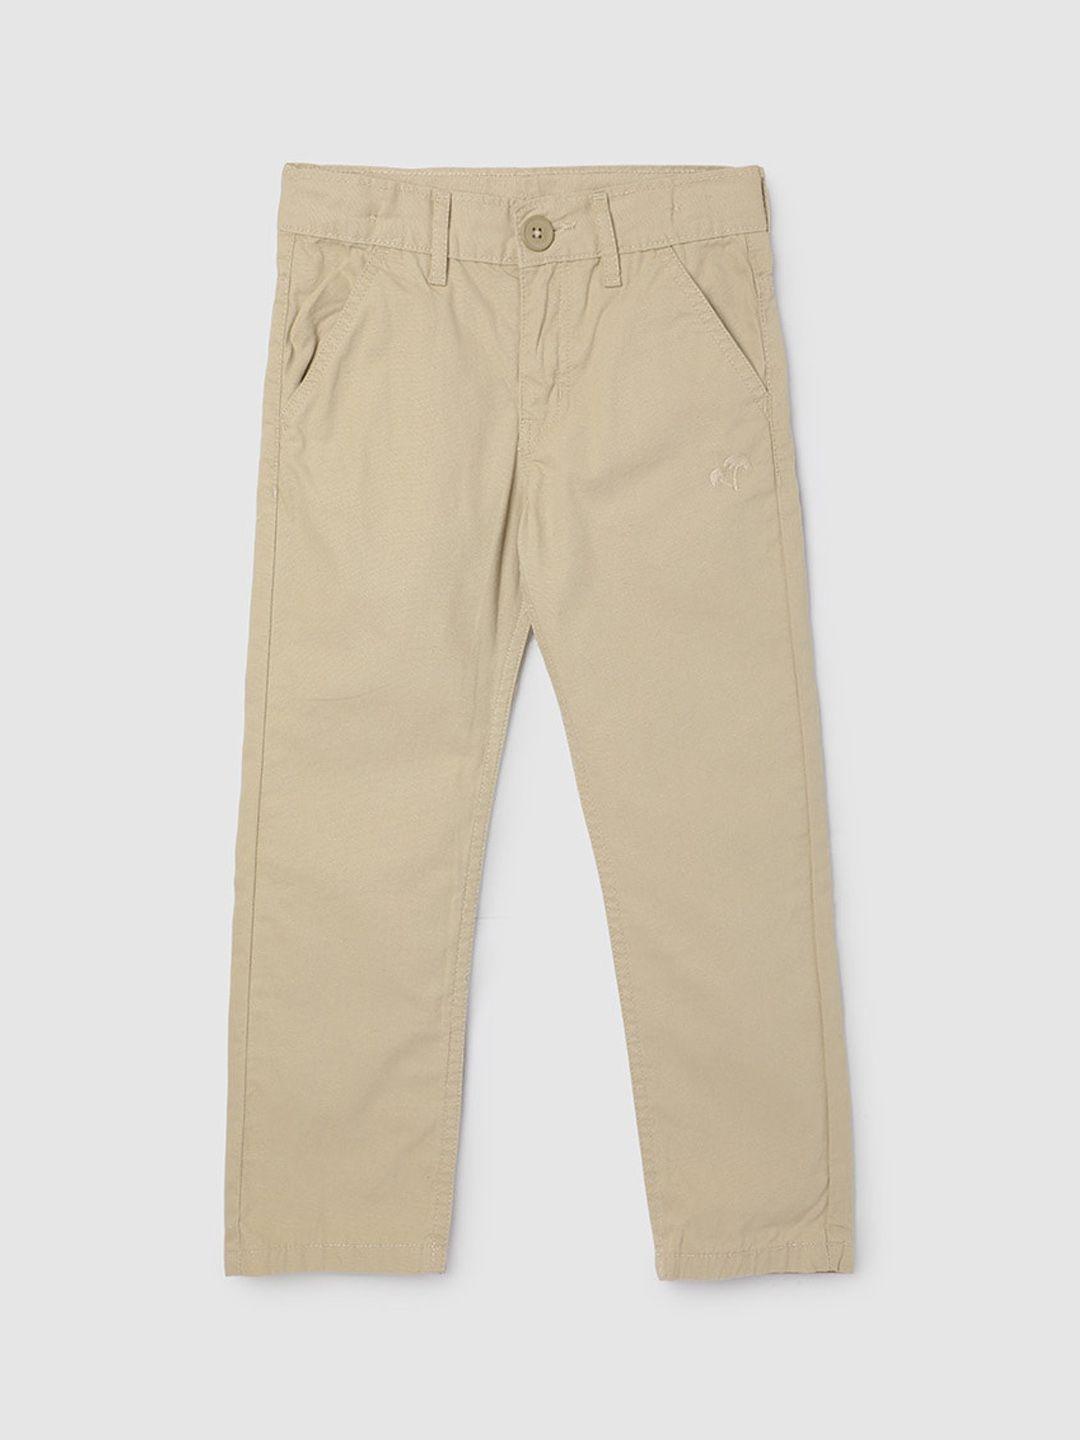 max boys regular fit pure cotton trousers